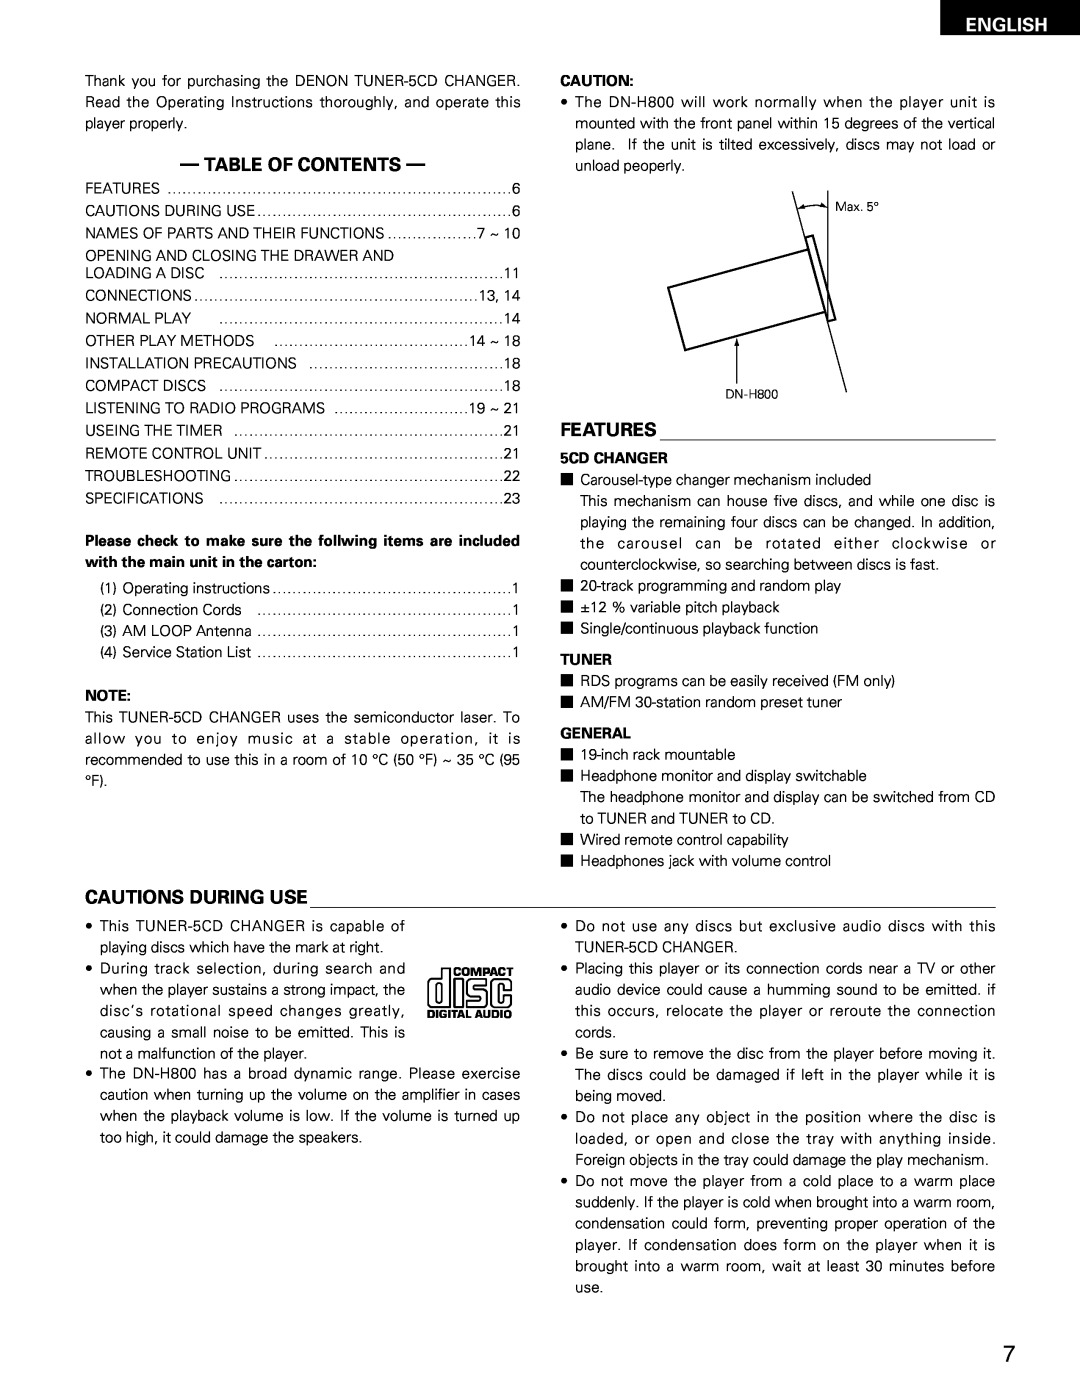 Denon DN-H800 operating instructions Table Of Contents, Features, Cautions During Use, English, 5CD CHANGER, Tuner, General 